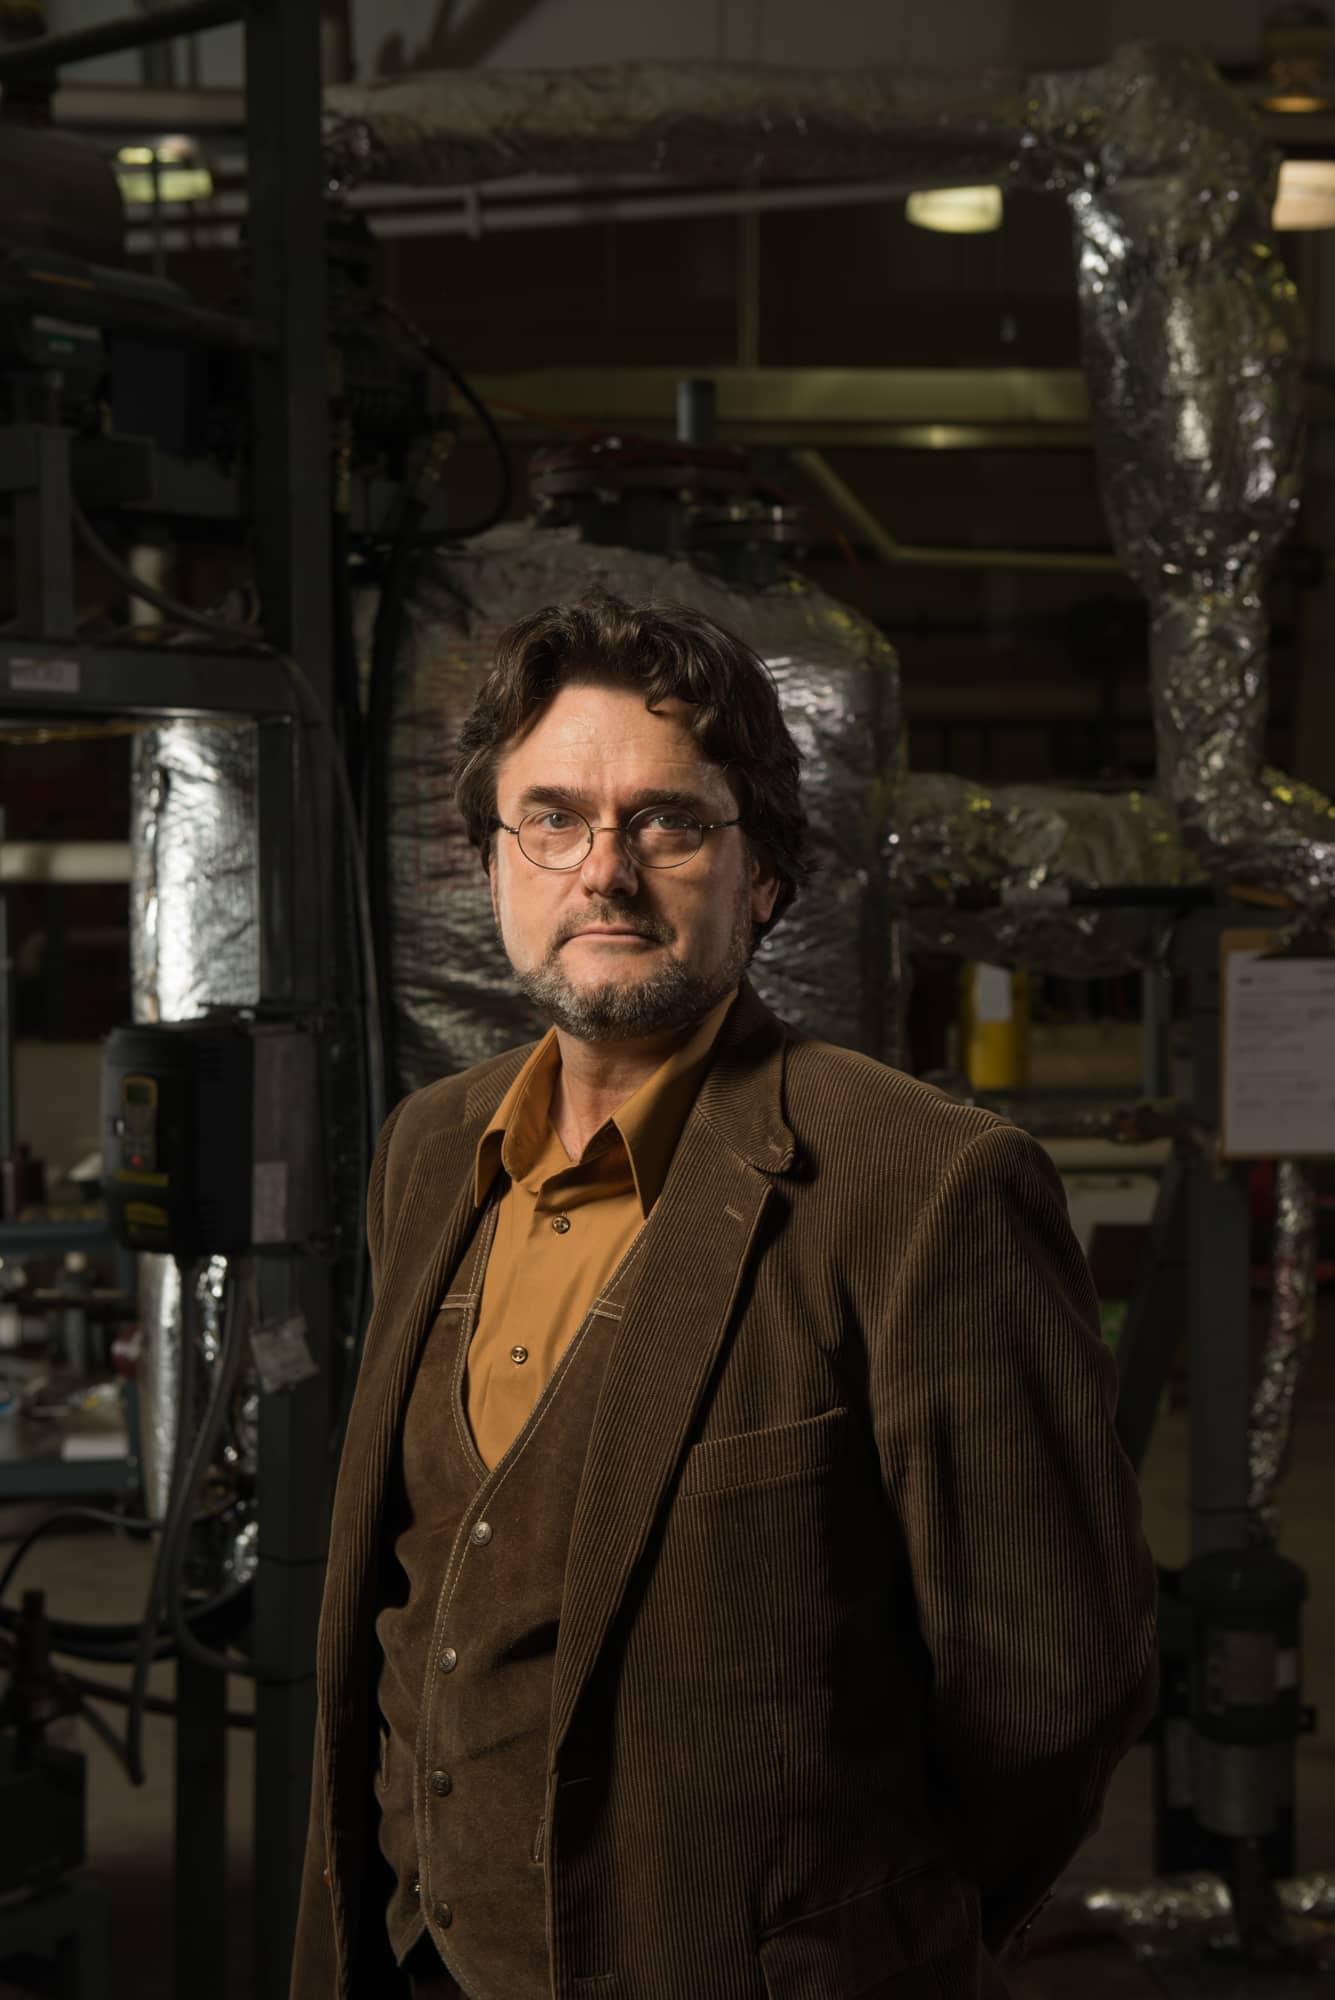 Ohio University Distinguished Professor and Russ Professor of Chemical Engineering in the Department of Chemical and Biomolecular Engineering Srdjan Nesic, Ph.D., has published extensively in the field of corrosion, including 18 articles in books, some of which are reference sections in the best-known corrosion handbooks.